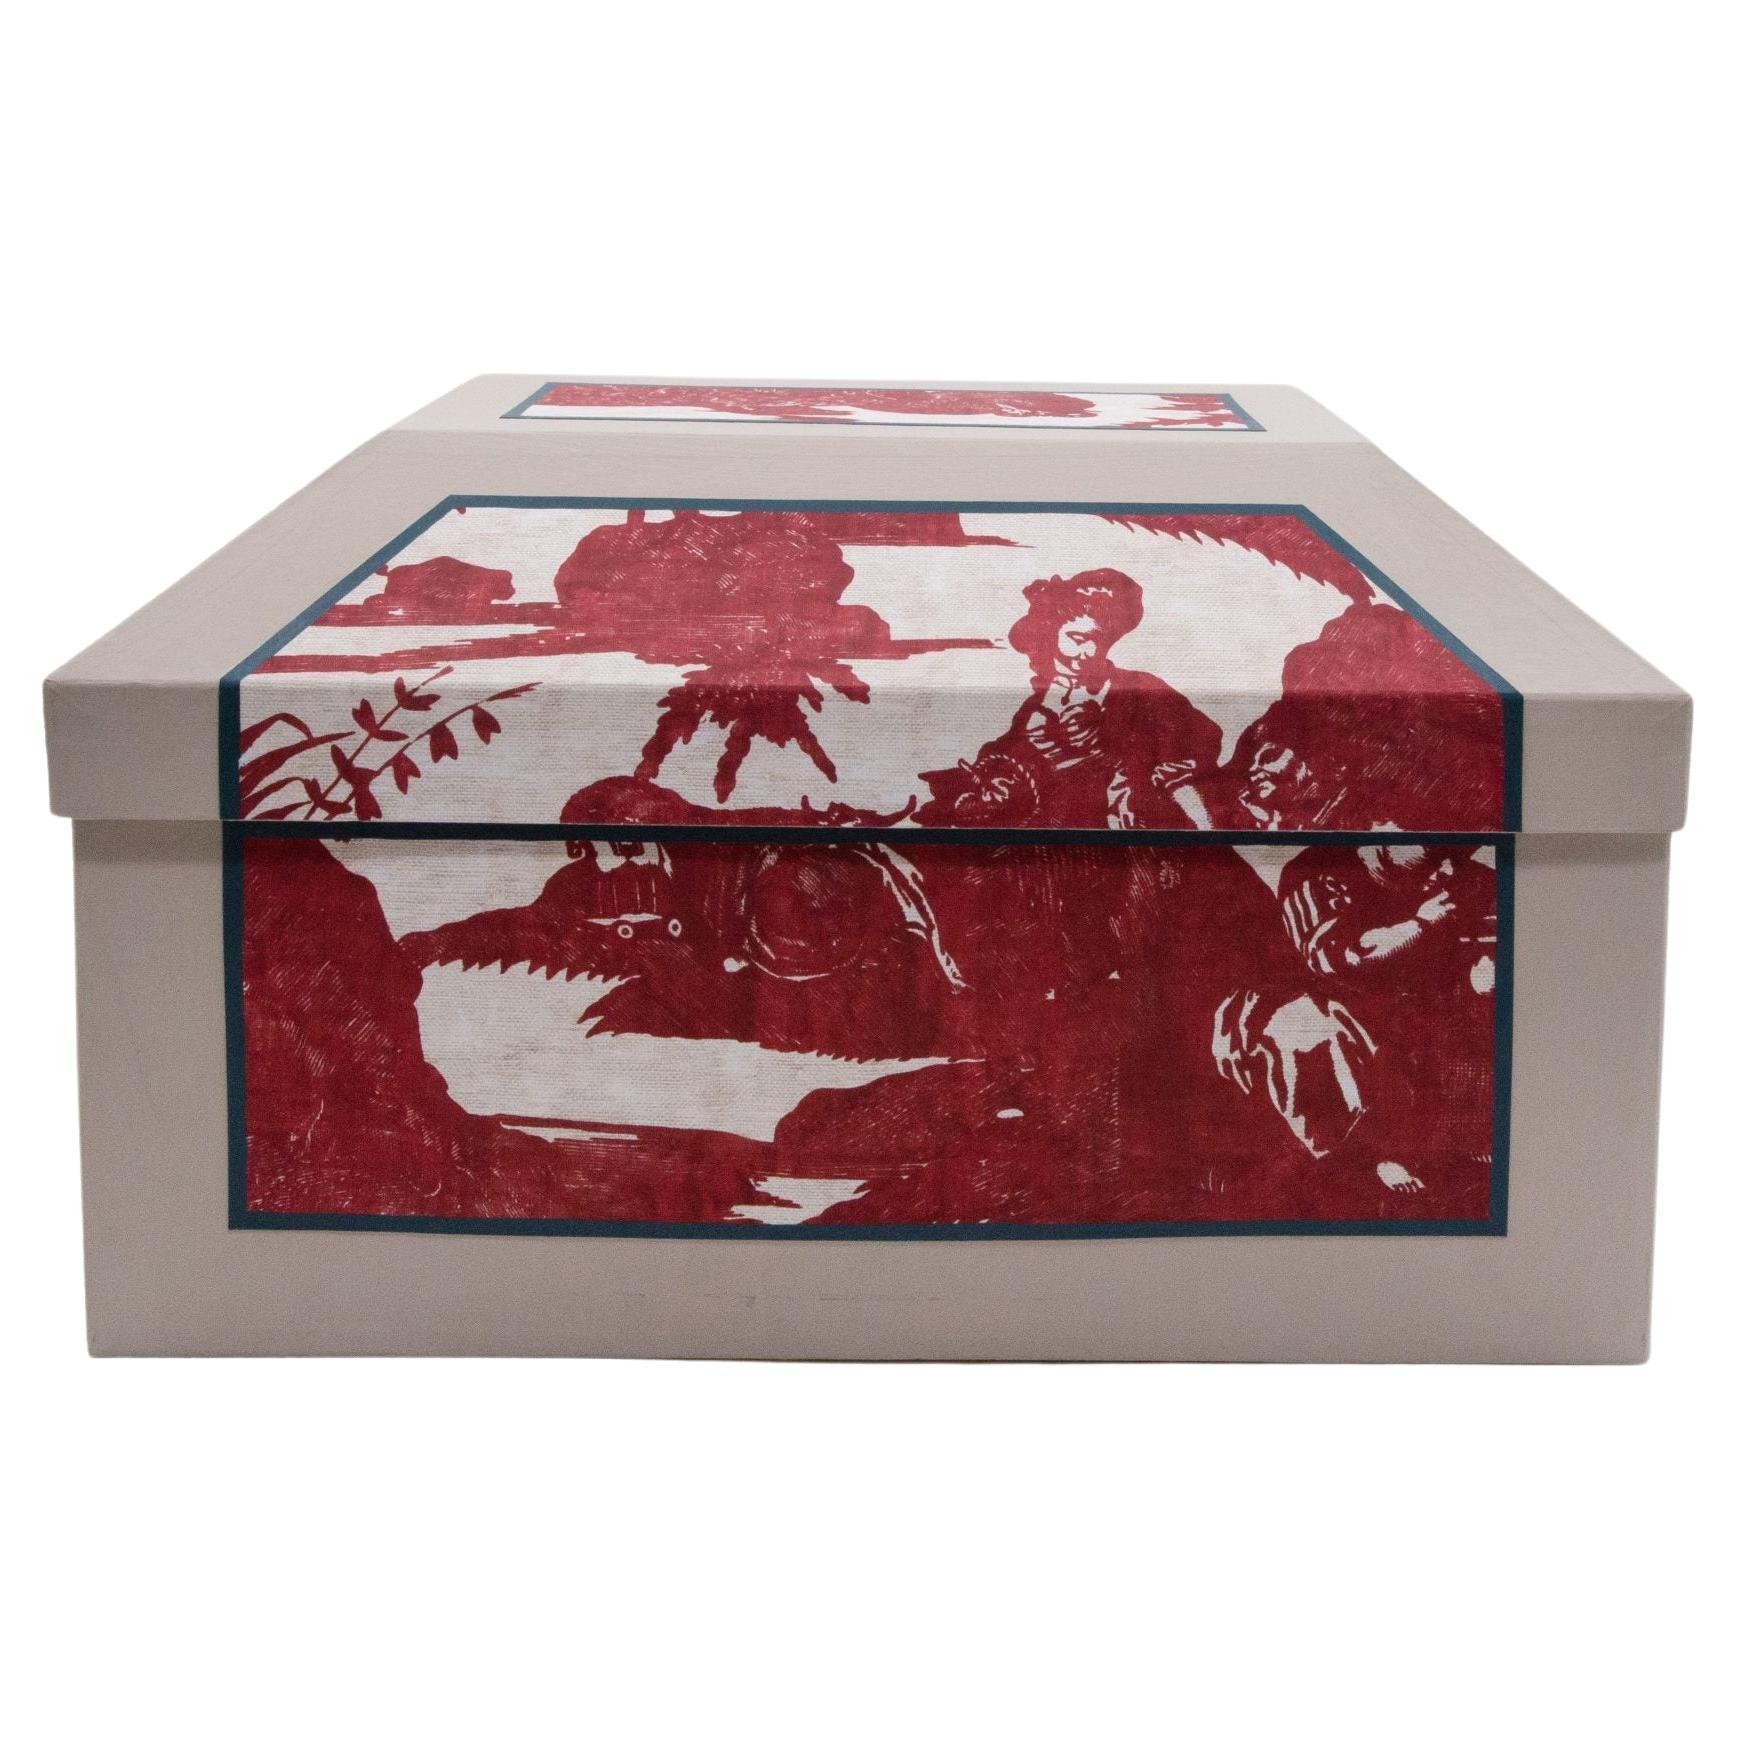 Handmade Papier-mâché Wedding Box - Made in France - Red Toile de Jouy print For Sale